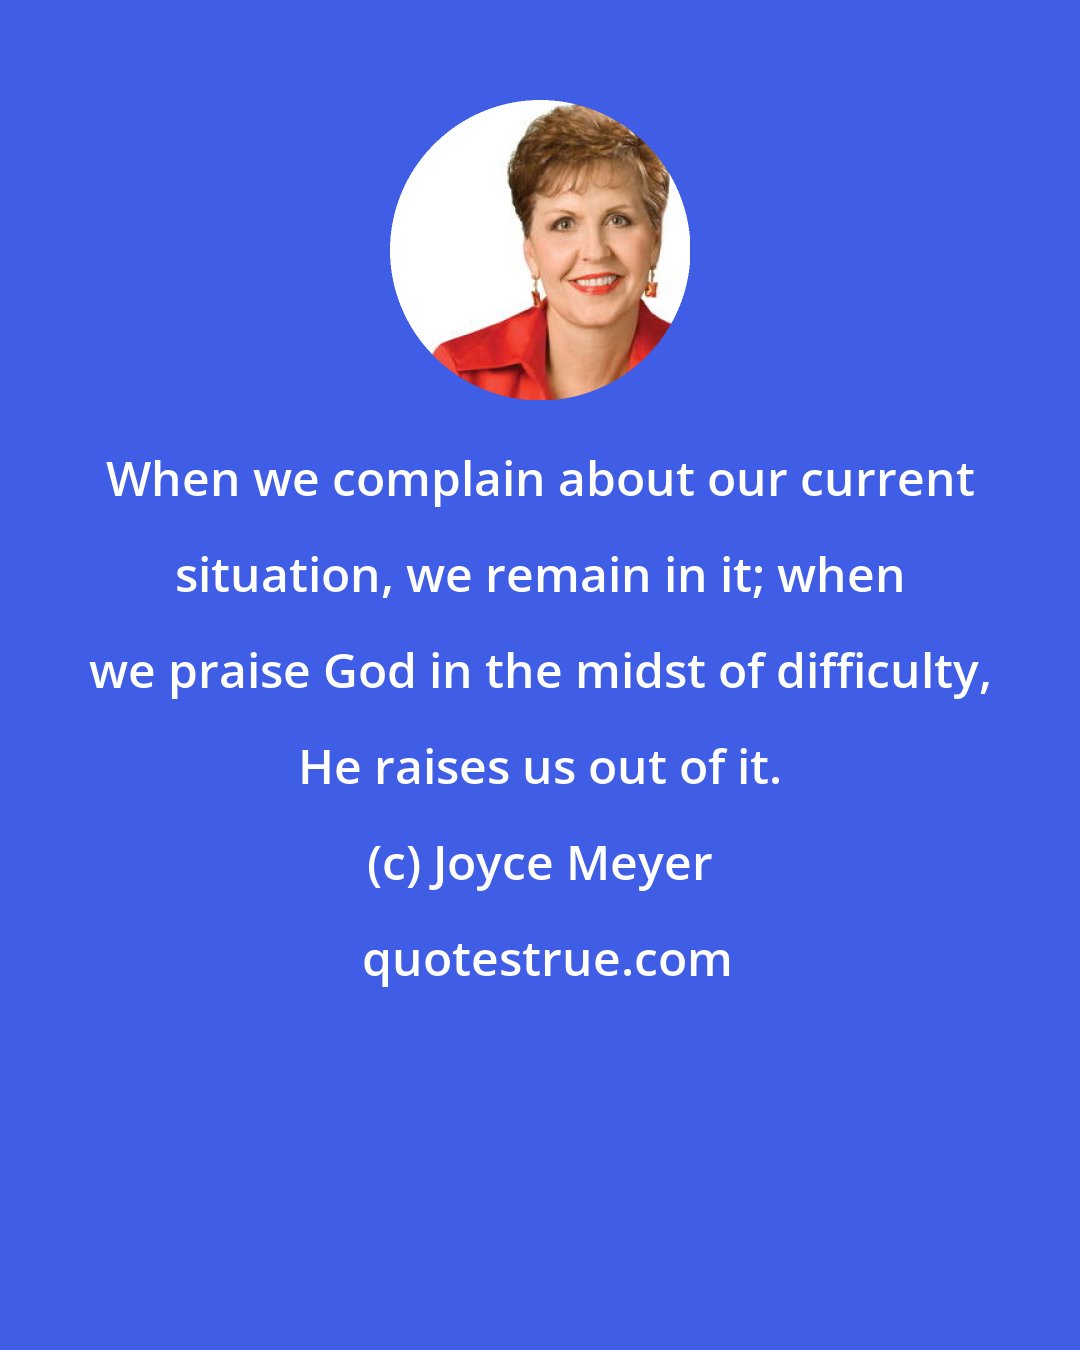 Joyce Meyer: When we complain about our current situation, we remain in it; when we praise God in the midst of difficulty, He raises us out of it.